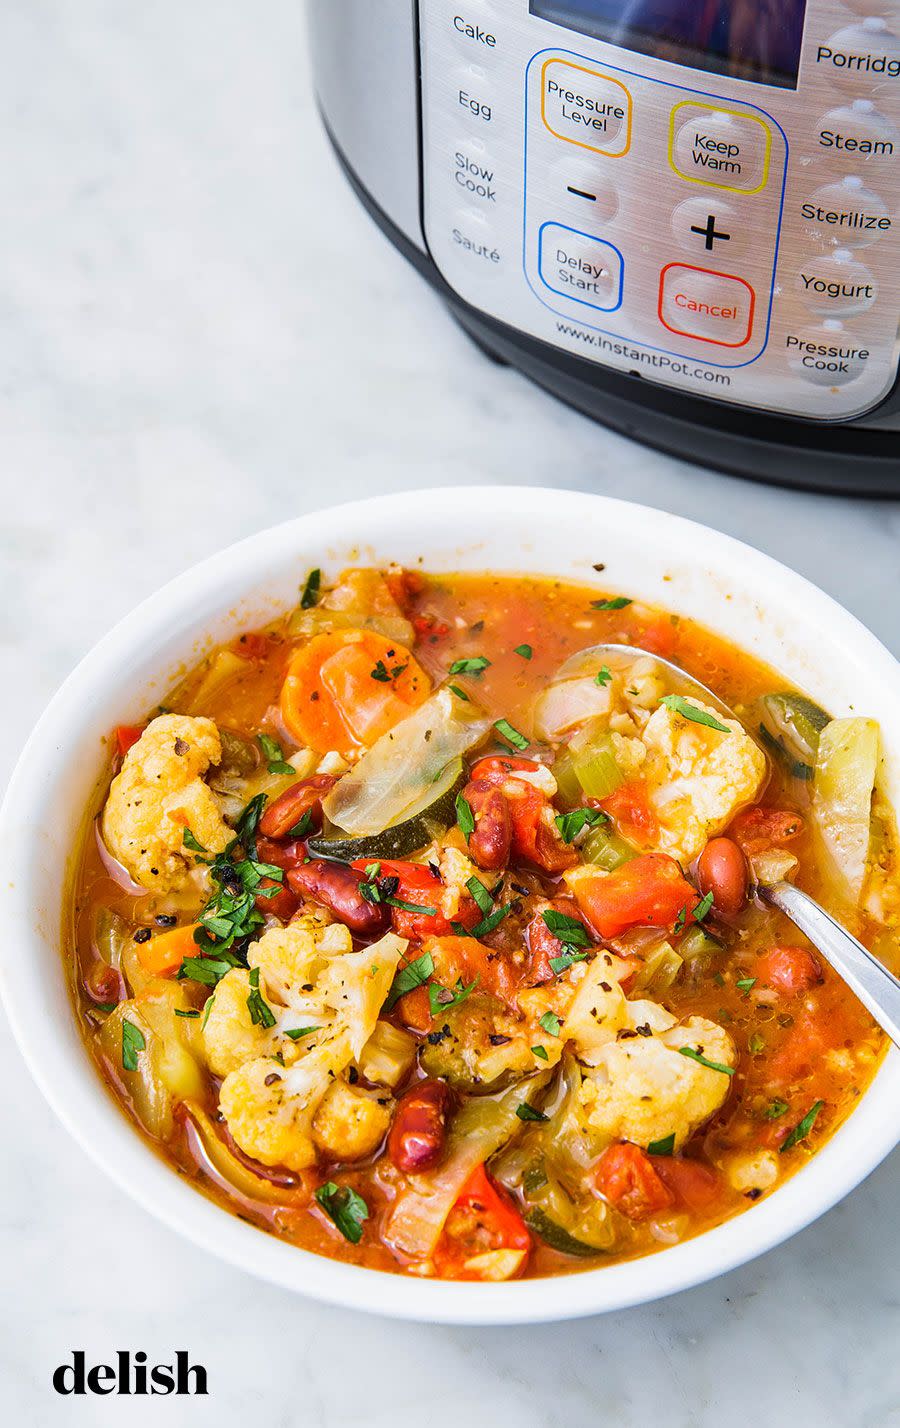 How To Turn Your Instant Pot Into A Slow Cooker